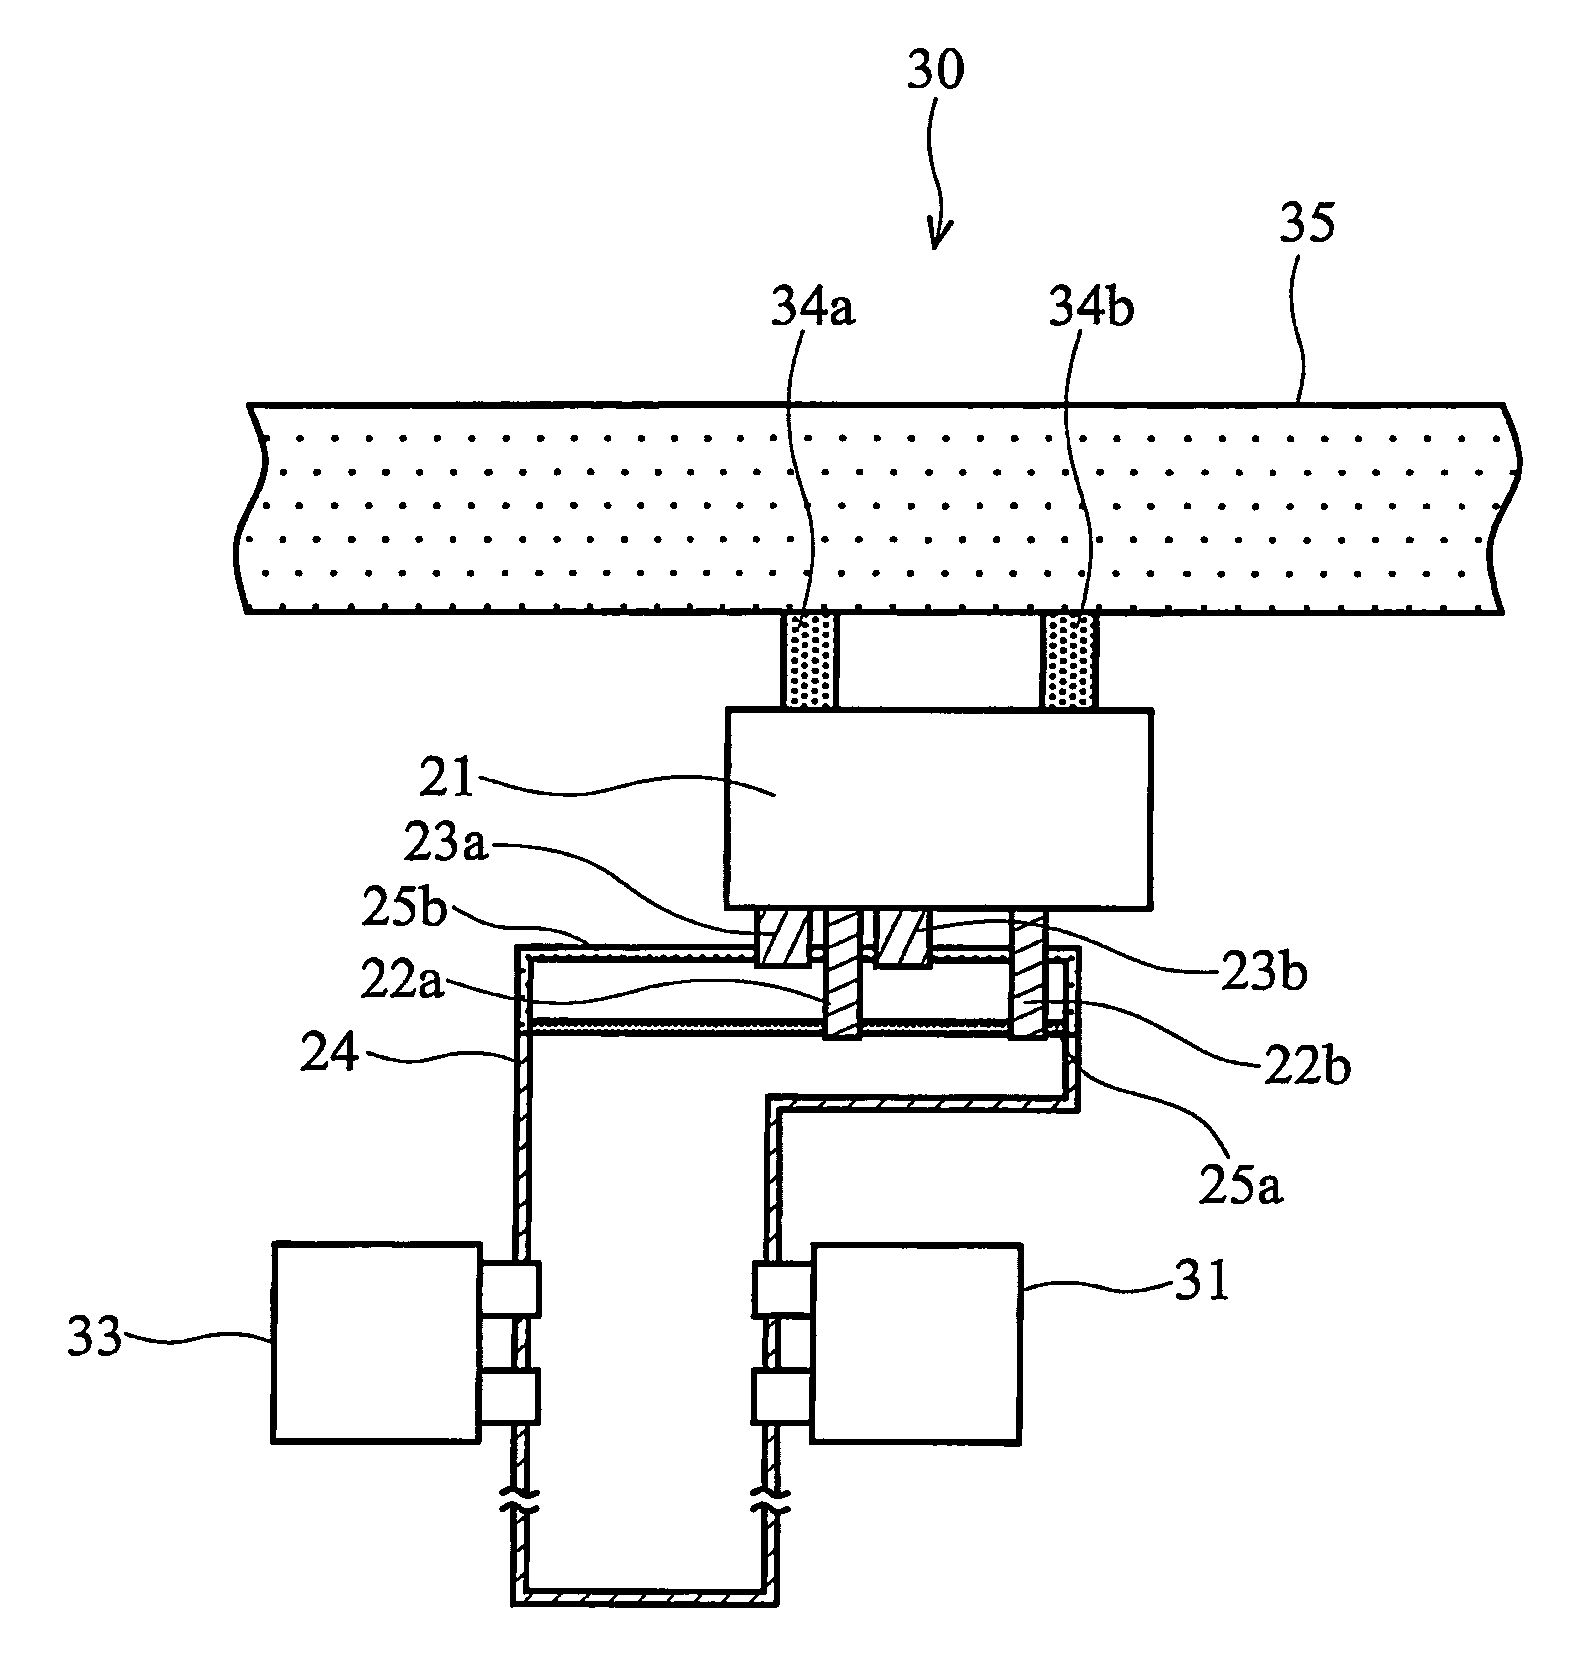 Transport system with multiple-load-port stockers